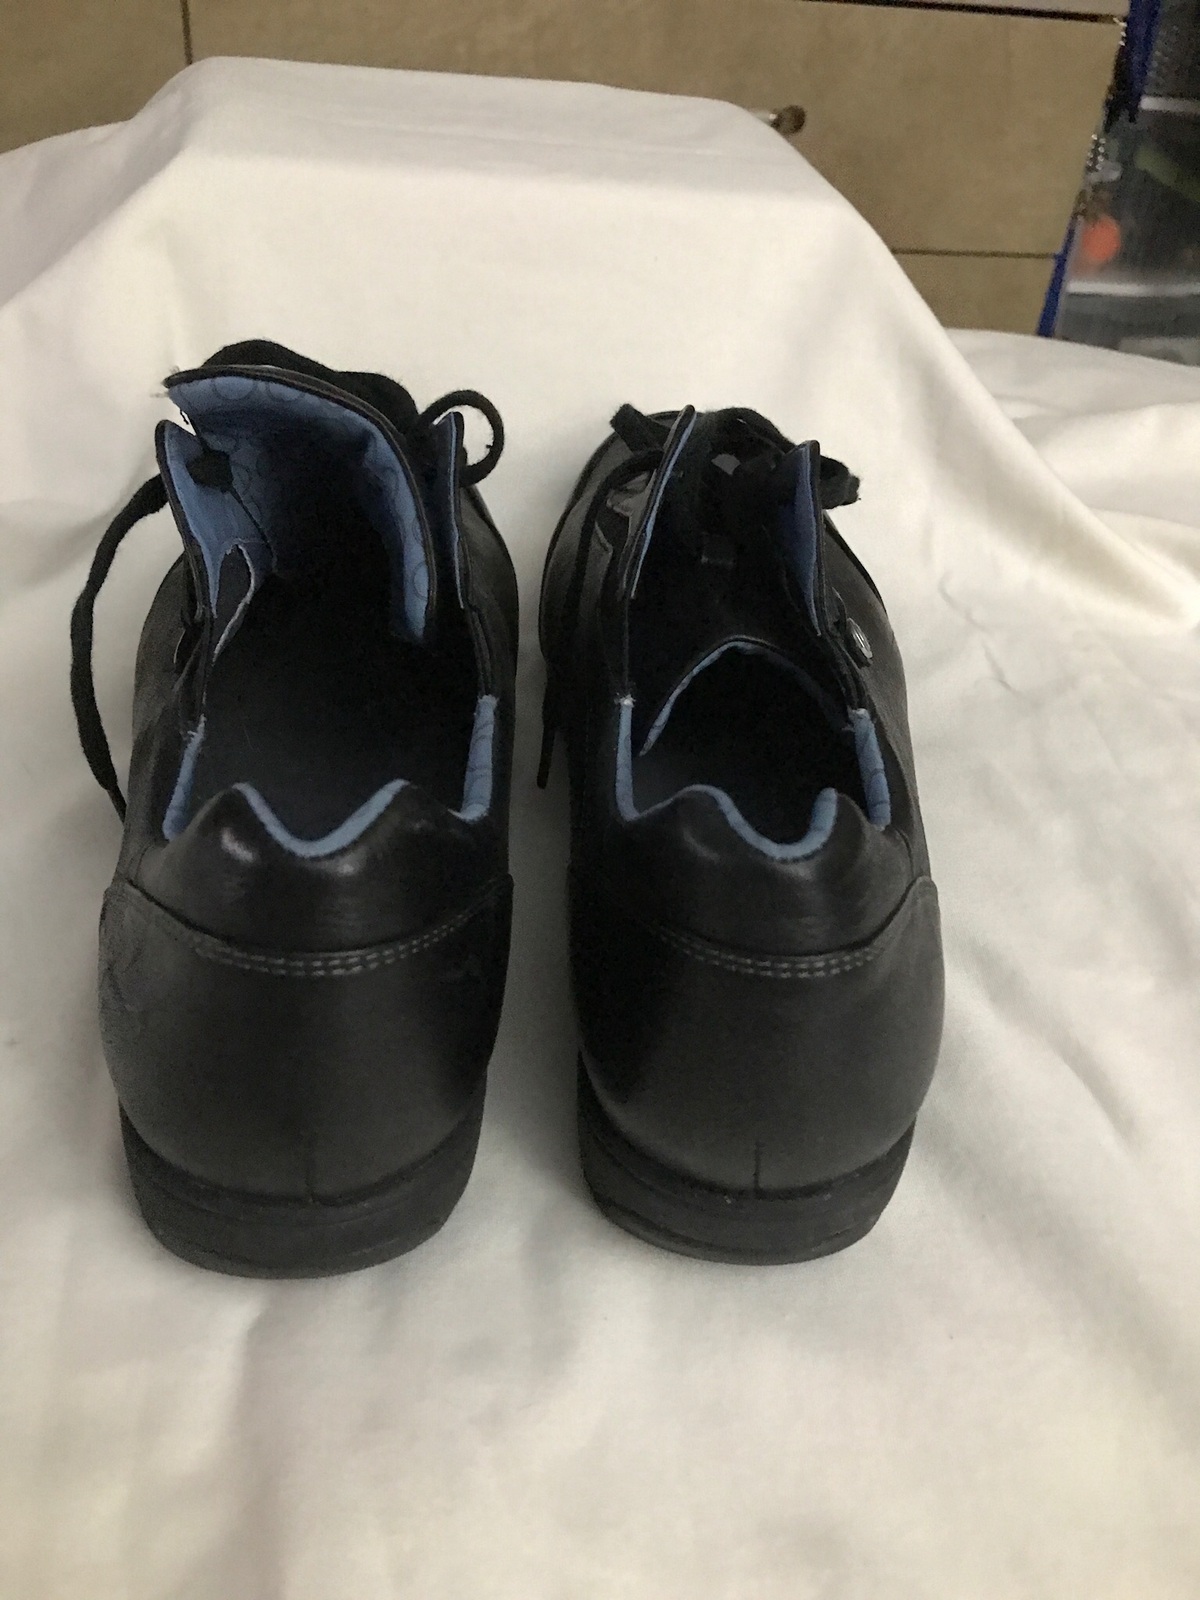 Rockport Black Leather casual shoe size 8.5W - Occupational